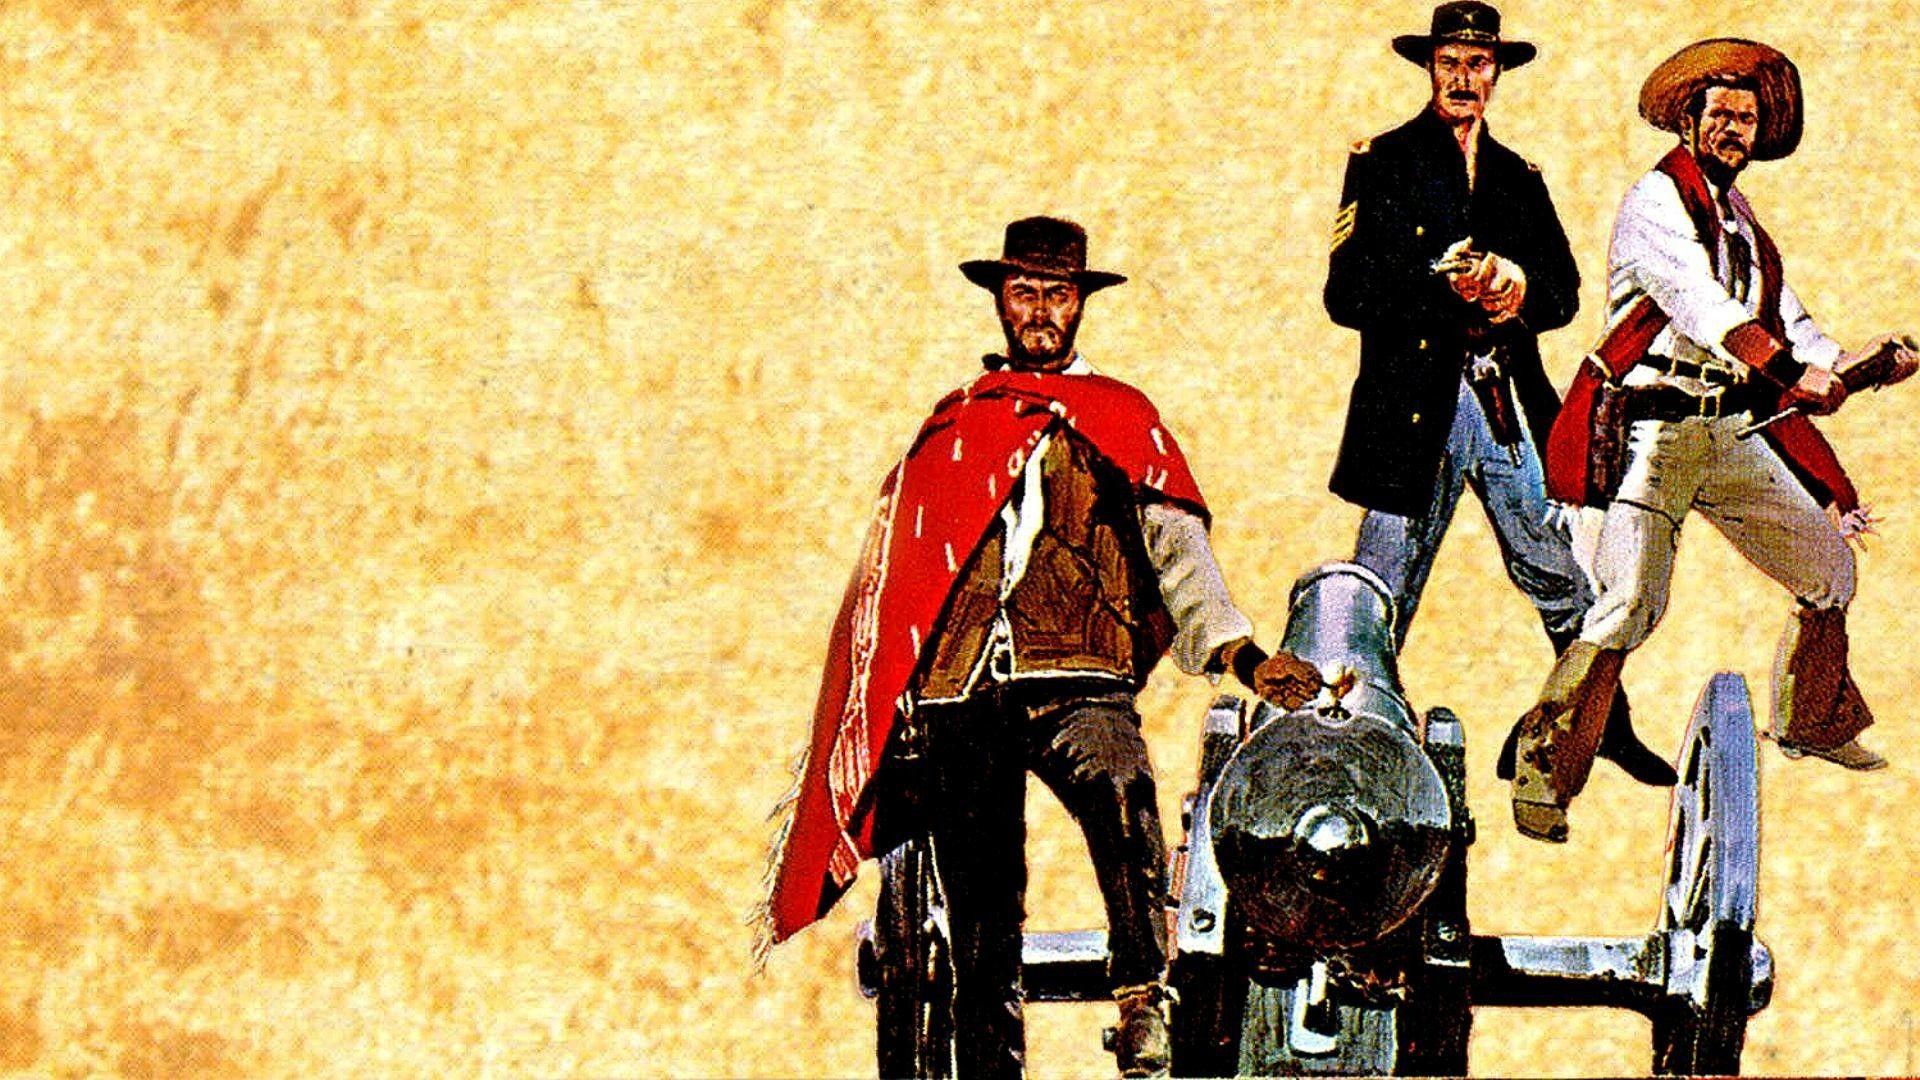 THE GOOD THE BAD AND THE UGLY western t wallpaperx1080